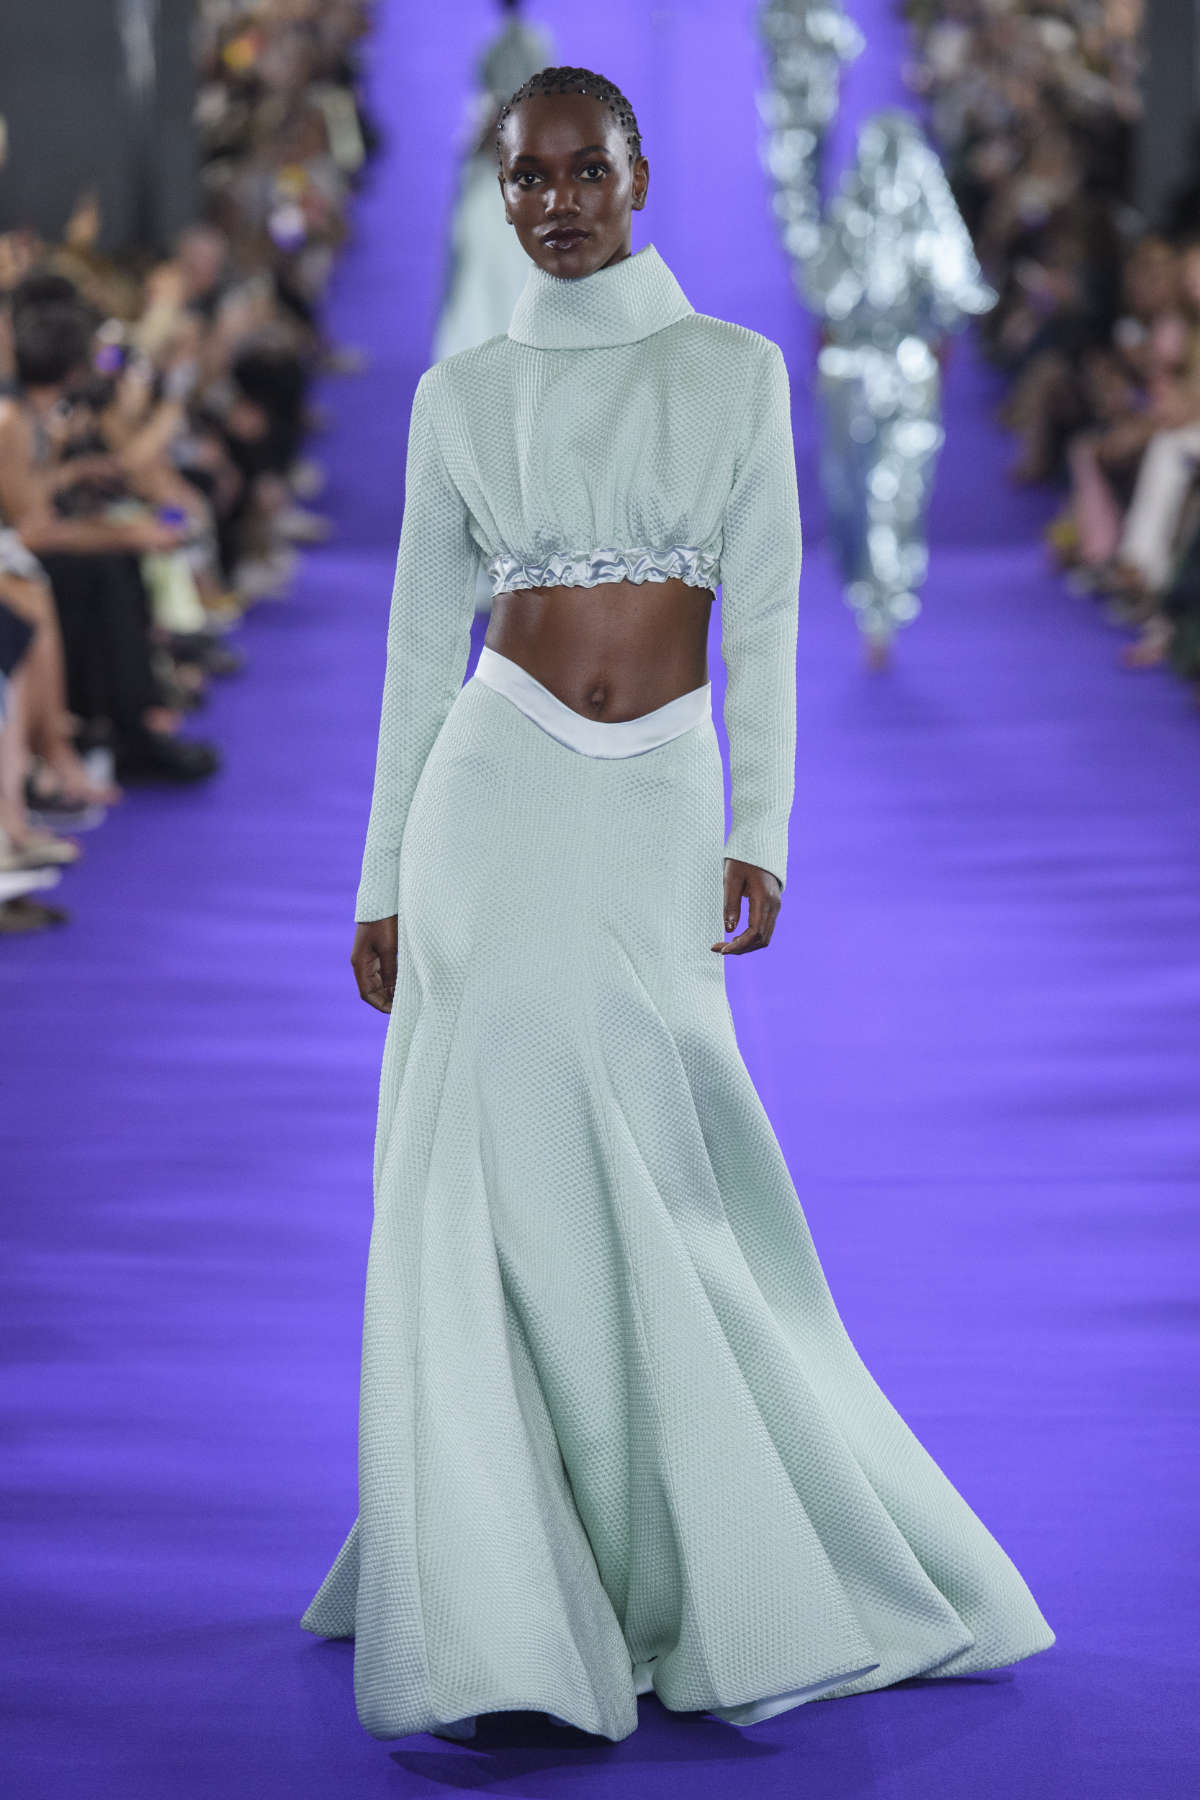 Alexis Mabille Presents Its New Haute Couture Fall-Winter 2022/2023 Collection